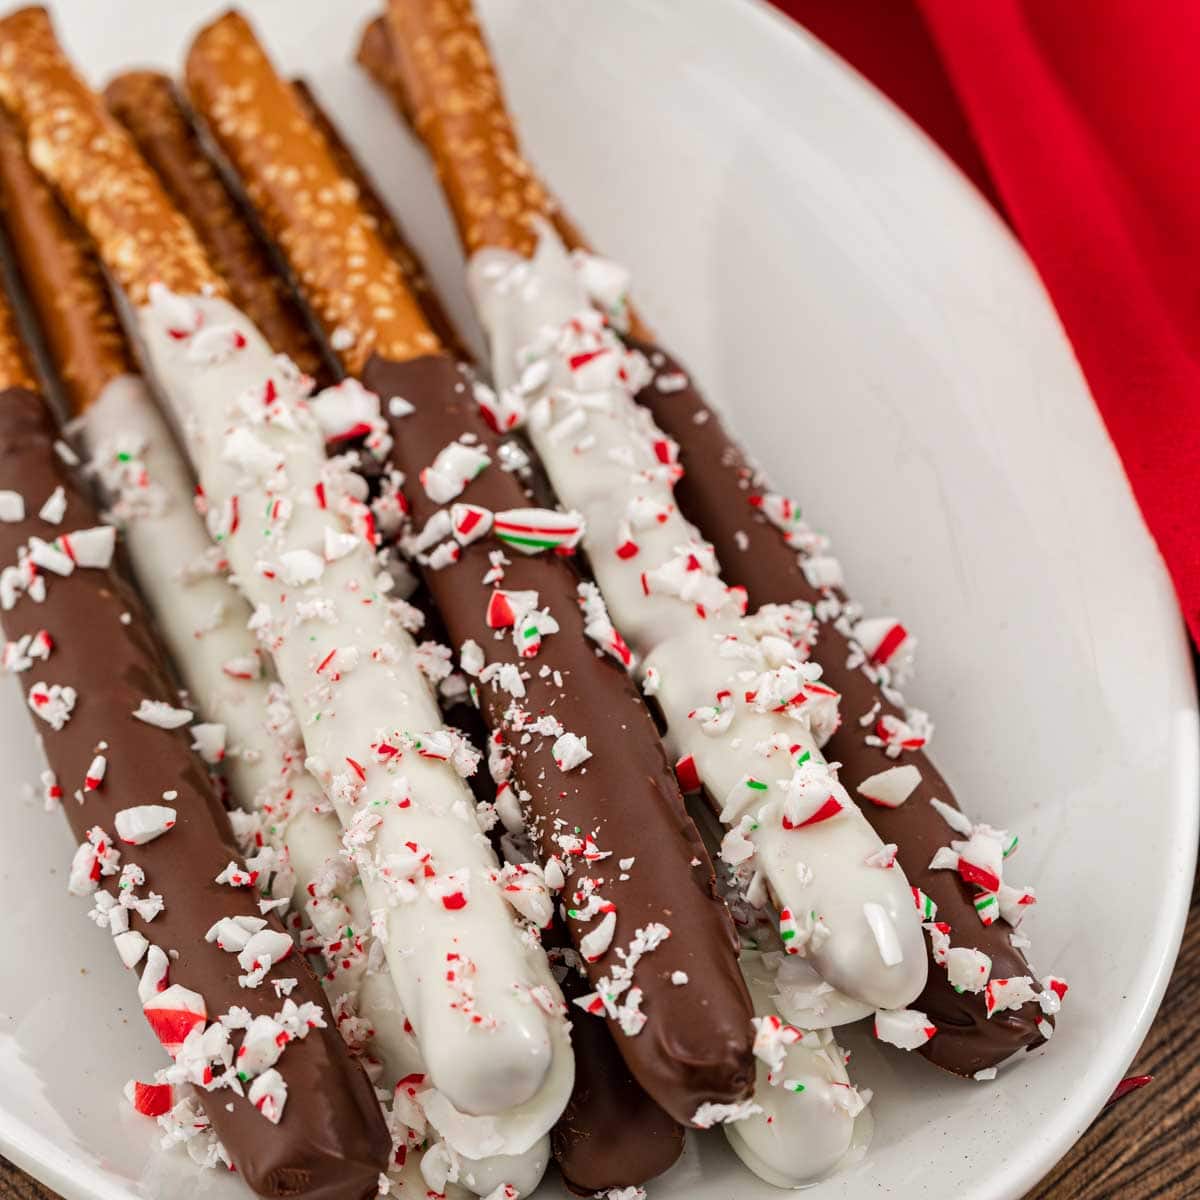 Peppermint Bark Pretzels dipped in chocolate and covered in candy cane pieces on plate